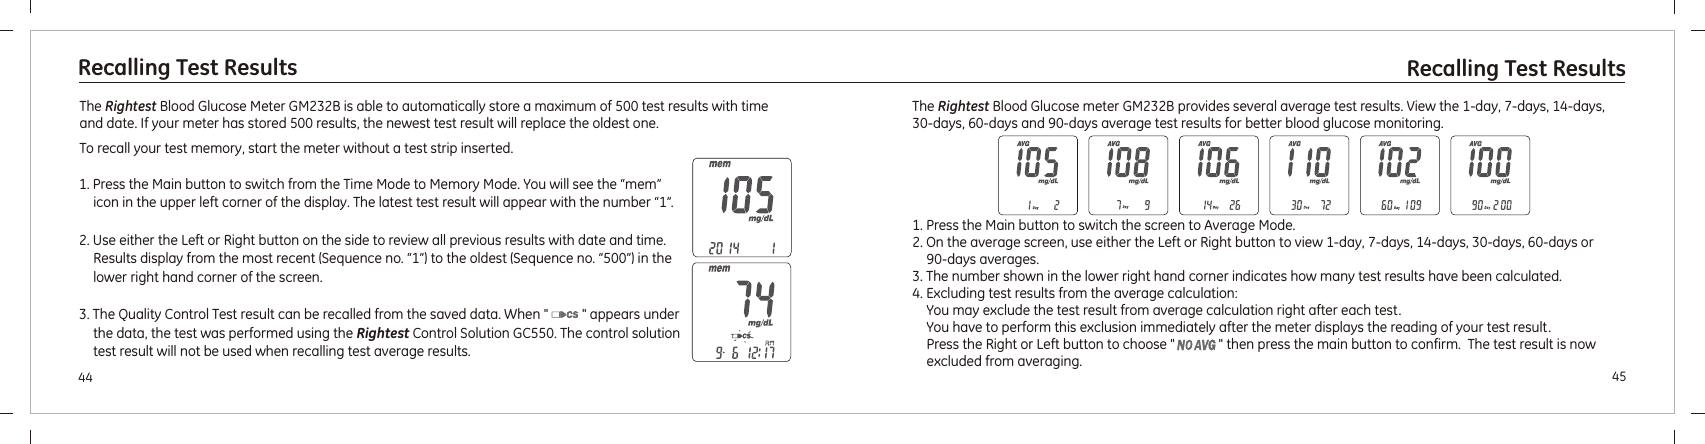 4544Recalling Test Results Recalling Test ResultsThe  Blood Glucose Meter  is able to automatically store a maximum of 500 test results with time and date. If your meter has stored 500 results, the newest test result will replace the oldest one.To recall your test memory, start the meter without a test strip inserted.Rightest GM232B 1. Press the Main button to switch from the Time Mode to Memory Mode. You will see the “mem” icon in the upper left corner of the display. The latest test result will appear with the number “1”.2. Use either the Left or Right button on the side to review all previous results with date and time. Results display from the most recent (Sequence no. “1”) to the oldest (Sequence no. “500”) in the lower right hand corner of the screen.3. The Quality Control Test result can be recalled from the saved data. When &quot;          &quot; appears under the data, the test was performed using the  . The control solution test result will not be used when recalling test average results.Rightest Control Solution GC5501. Press the Main button to switch the screen to Average Mode.2. On the average screen, use either the Left or Right button to view 1-day, 7-days, 14-days, 30-days, 60-days or 90-days averages.3. The number shown in the lower right hand corner indicates how many test results have been calculated.4. Excluding test results from the average calculation: You may exclude the test result from average calculation right after each test.You have to perform this exclusion immediately after the meter displays the reading of your test result. Press the Right or Left button to choose &quot;             &quot; then press the main button to confirm.  The test result is now excluded from averaging.The   Blood Glucose meter  provides several average test results. View the 1-day, 7-days, 14-days, 30-days, 60-days and 90-days average test results for better blood glucose monitoring.Rightest GM232B 